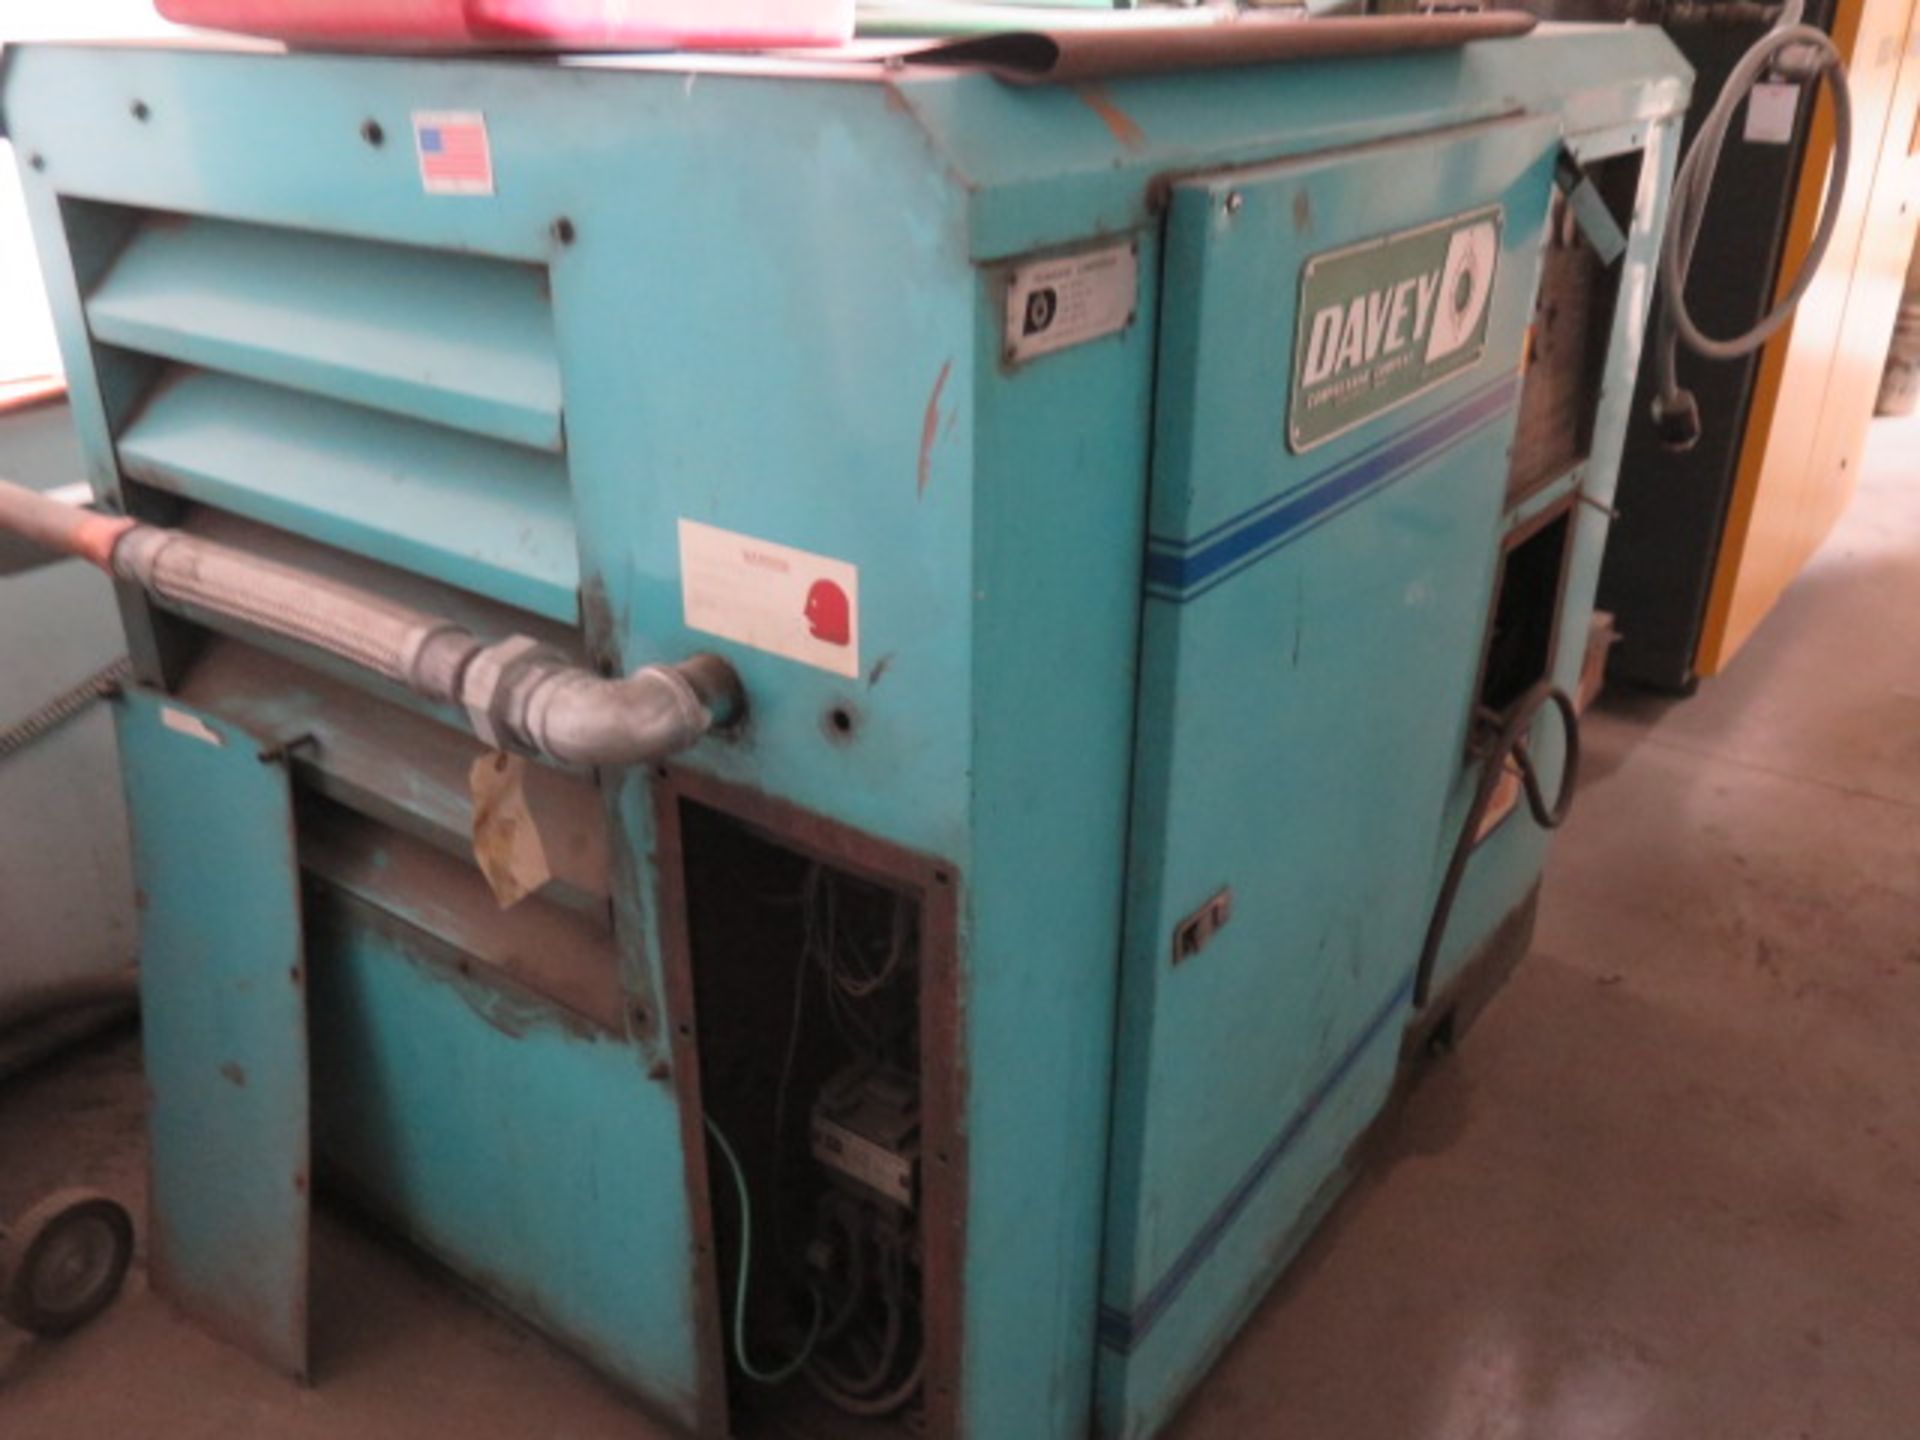 Davey "Permavane" mdl. 25BAQ 25Hp Rotary Vane Air Compressor s/n 37371 (SOLD AS-IS - NO WARRANTY) - Image 2 of 4